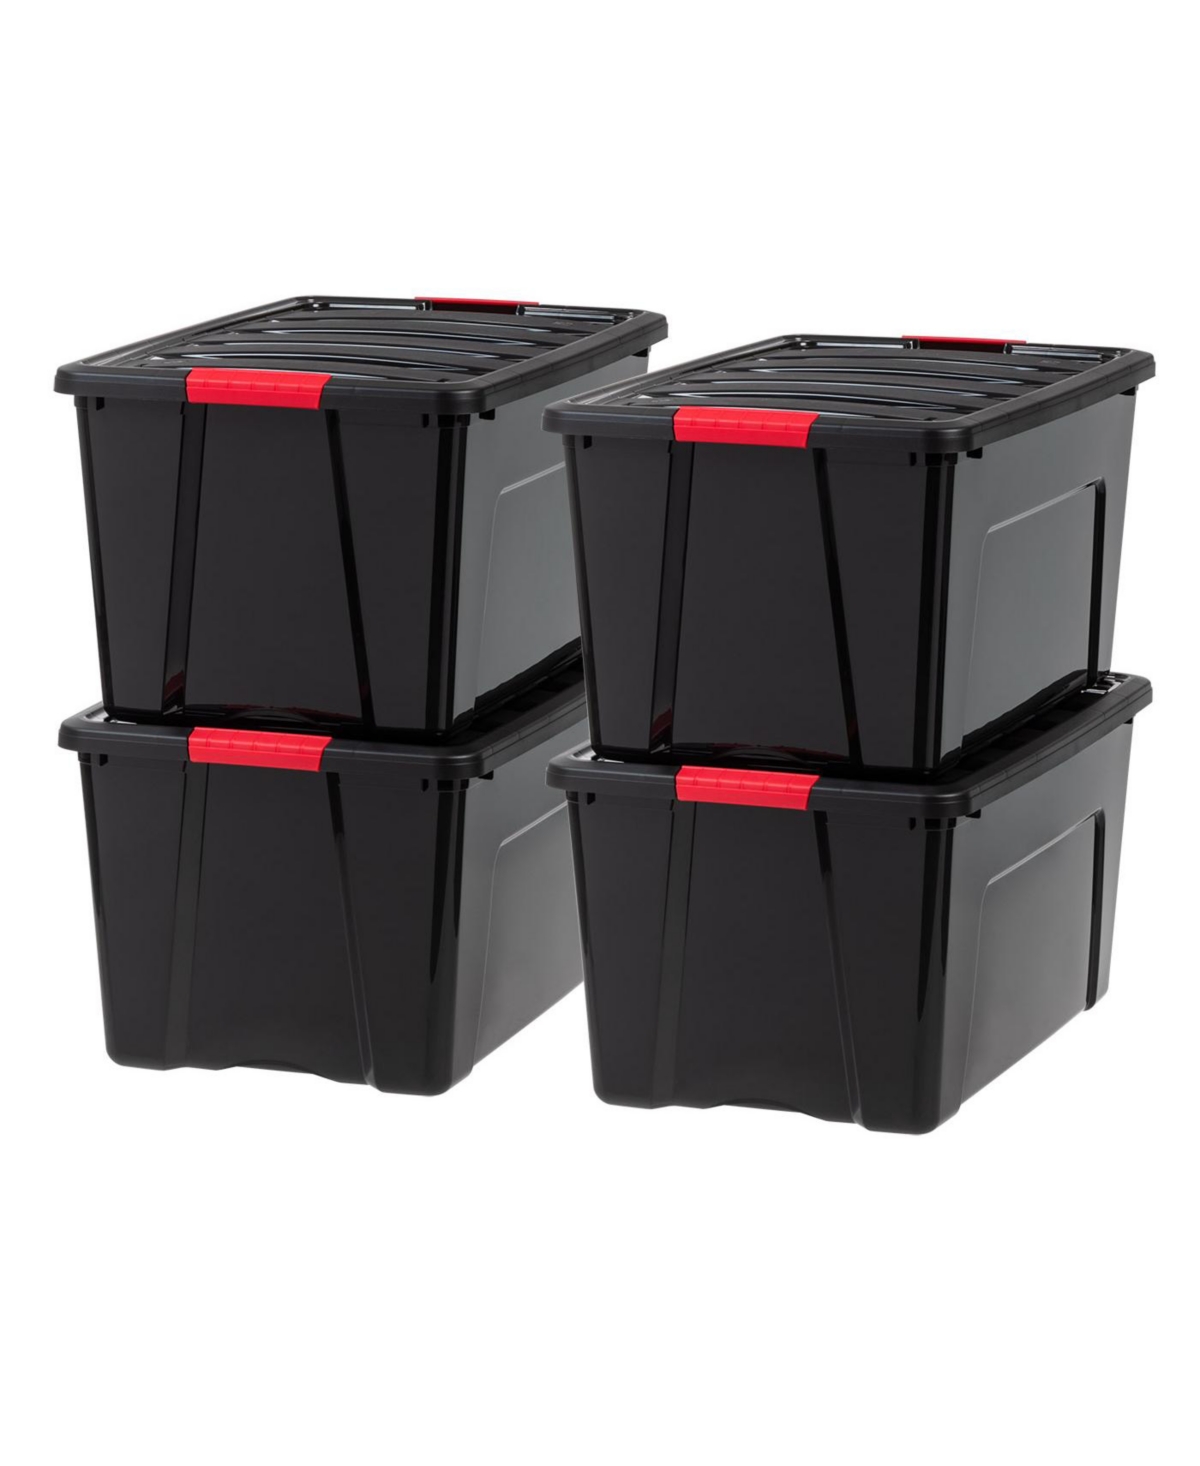 72 Quart Stackable Plastic Storage Bins with Lids and Latching Buckles, 4 Pack - Black, Containers with Lids and Latches - Black